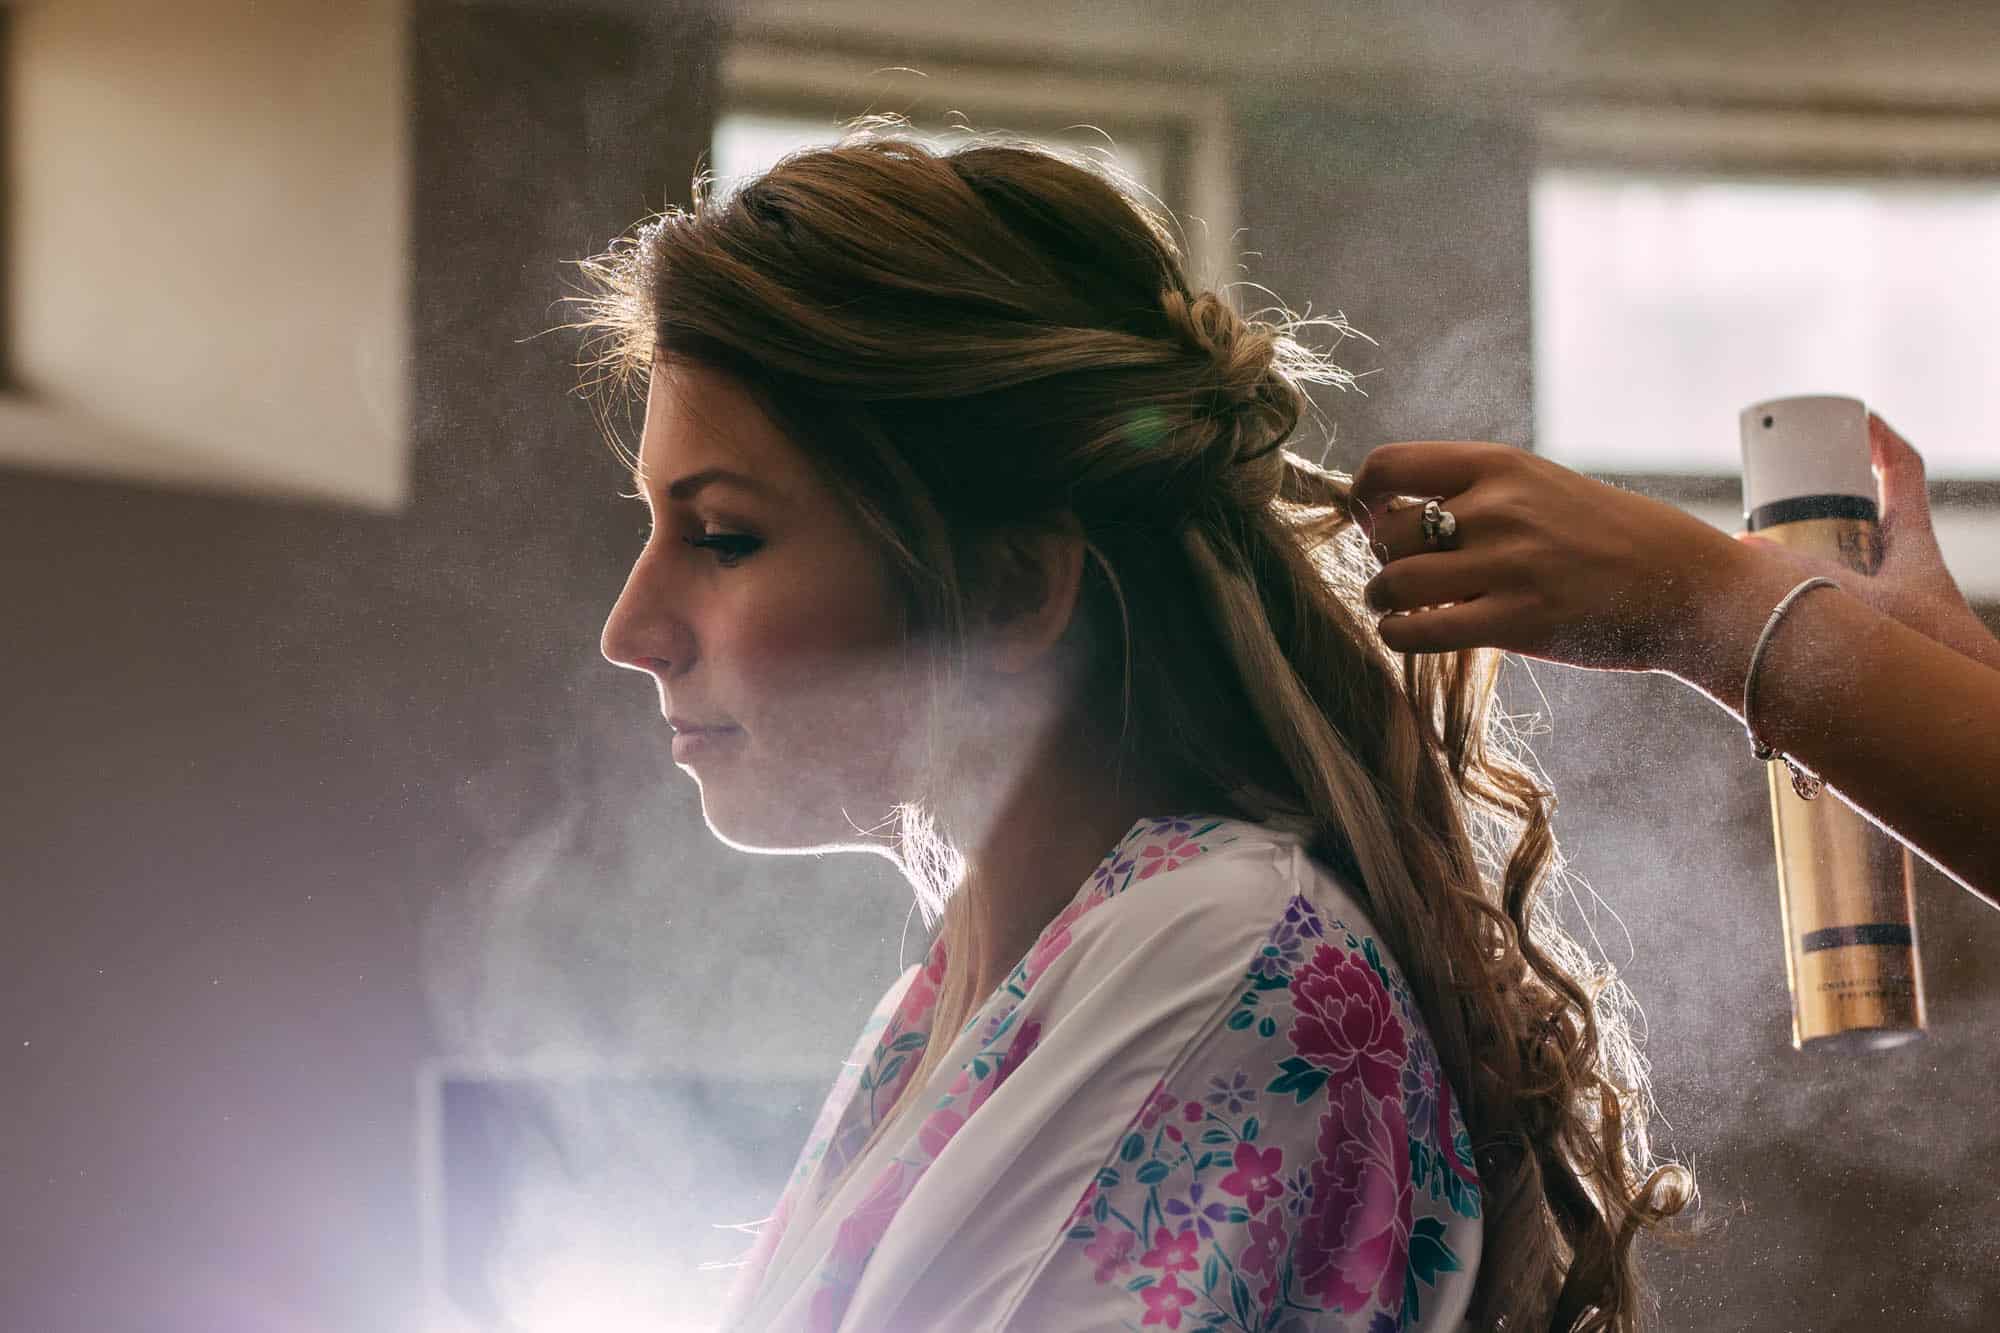 A woman starting to plan her wedding while having her hair done in front of the mirror.